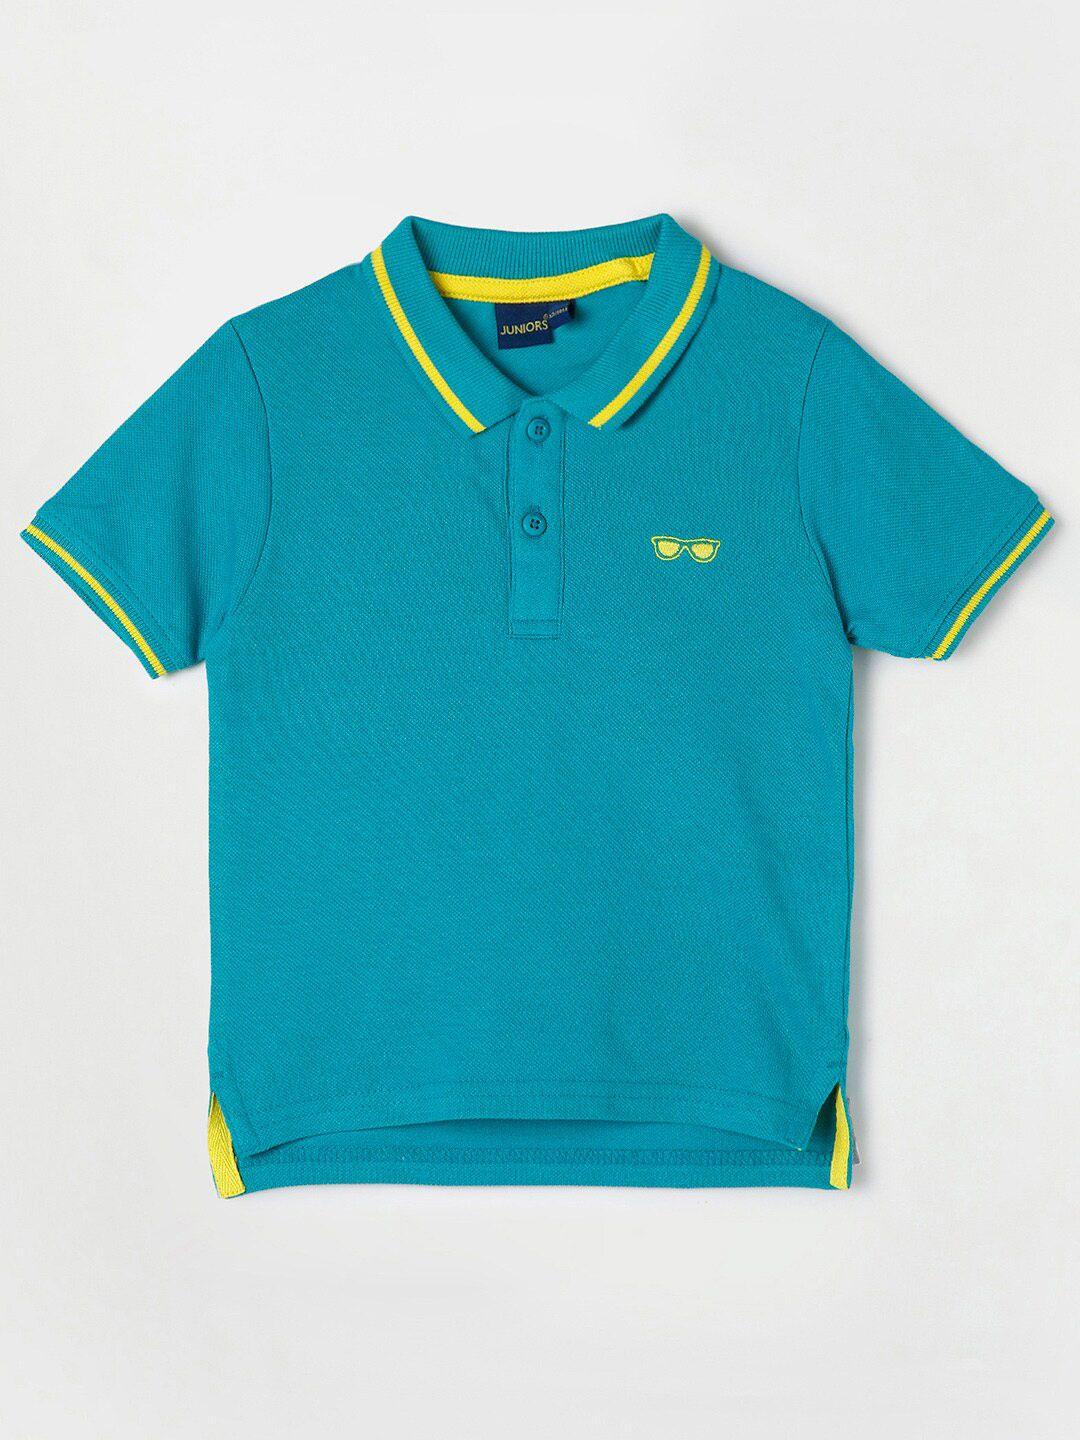 juniors by lifestyle boys turquoise blue & yellow polo collar cotton t-shirt